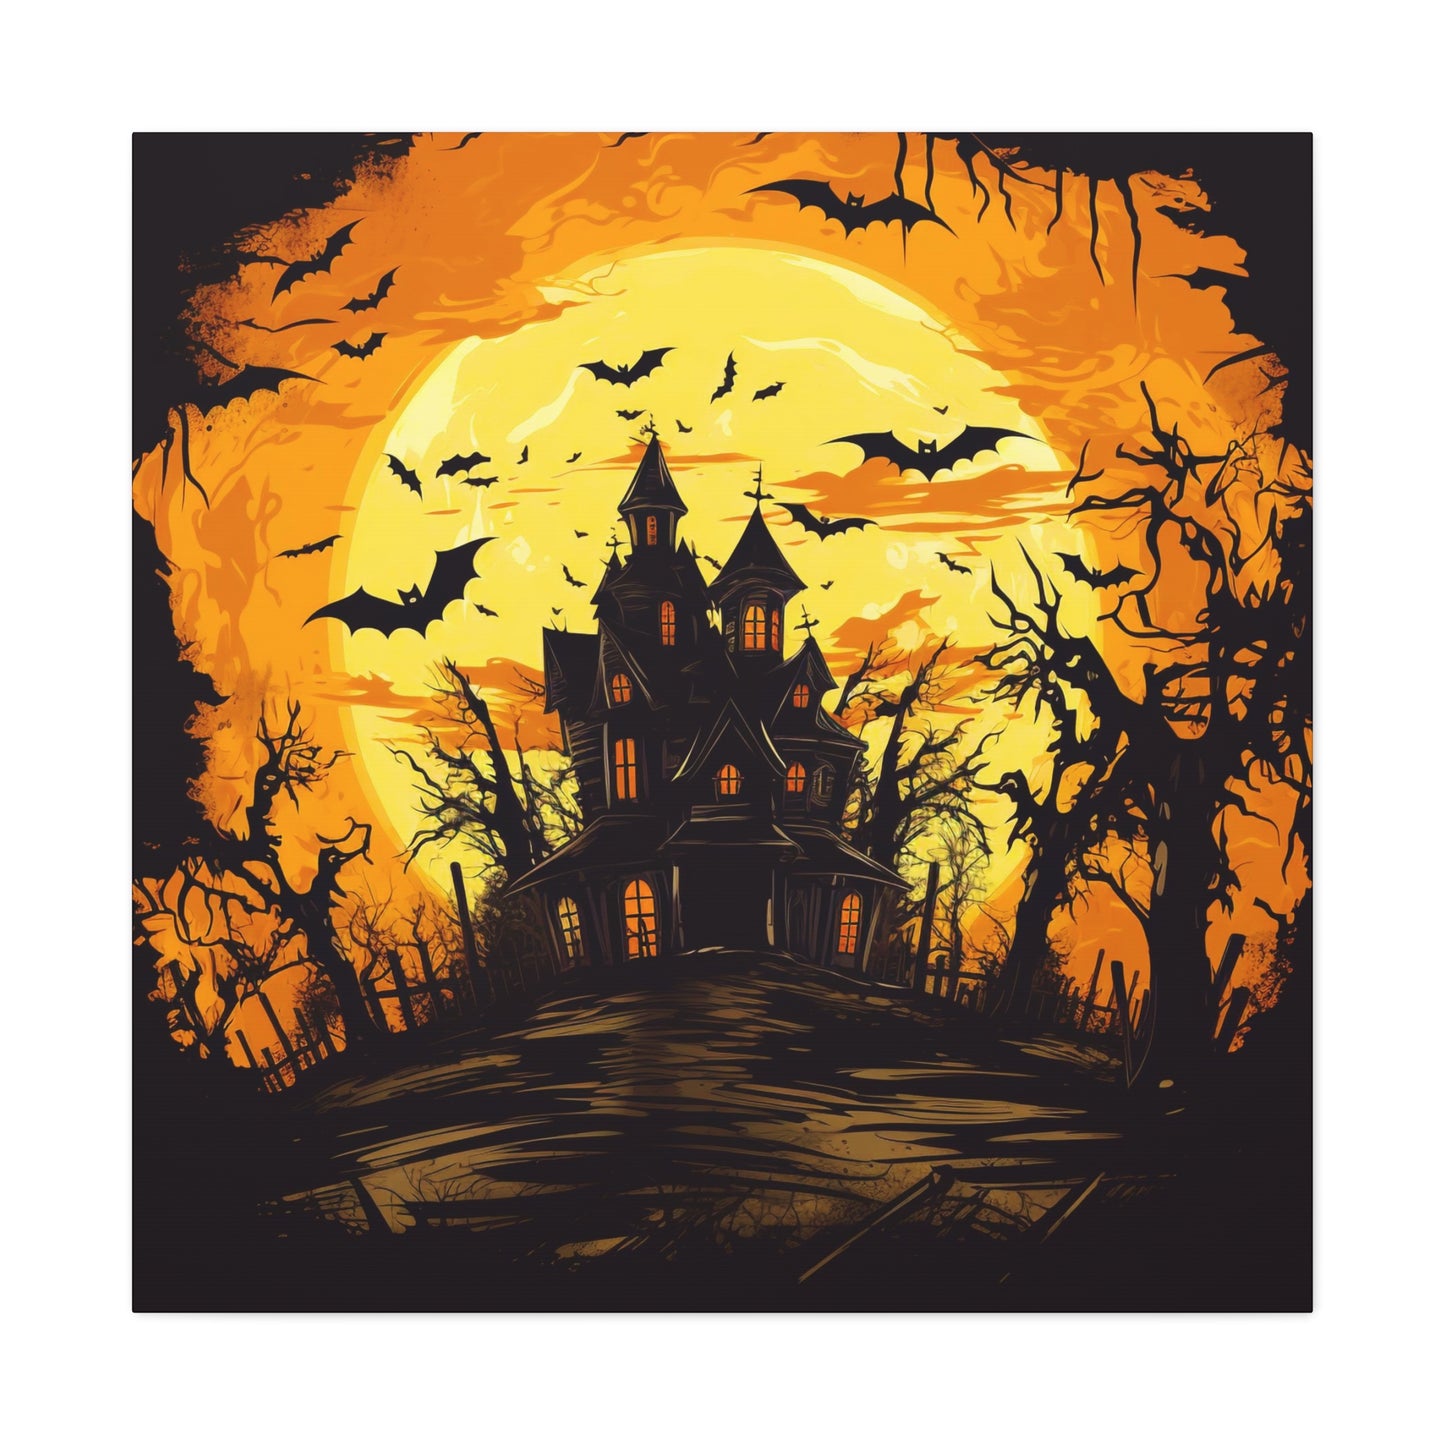 Haunted House Silhouette Canvas Print Halloween Wall Decor Art Prints Gifts